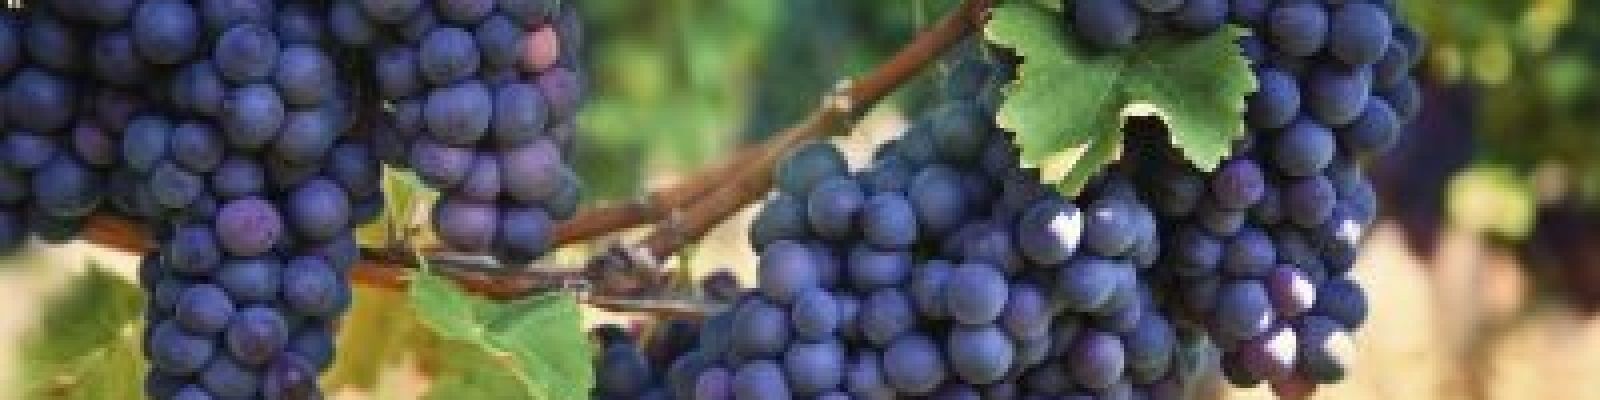 group winery tours